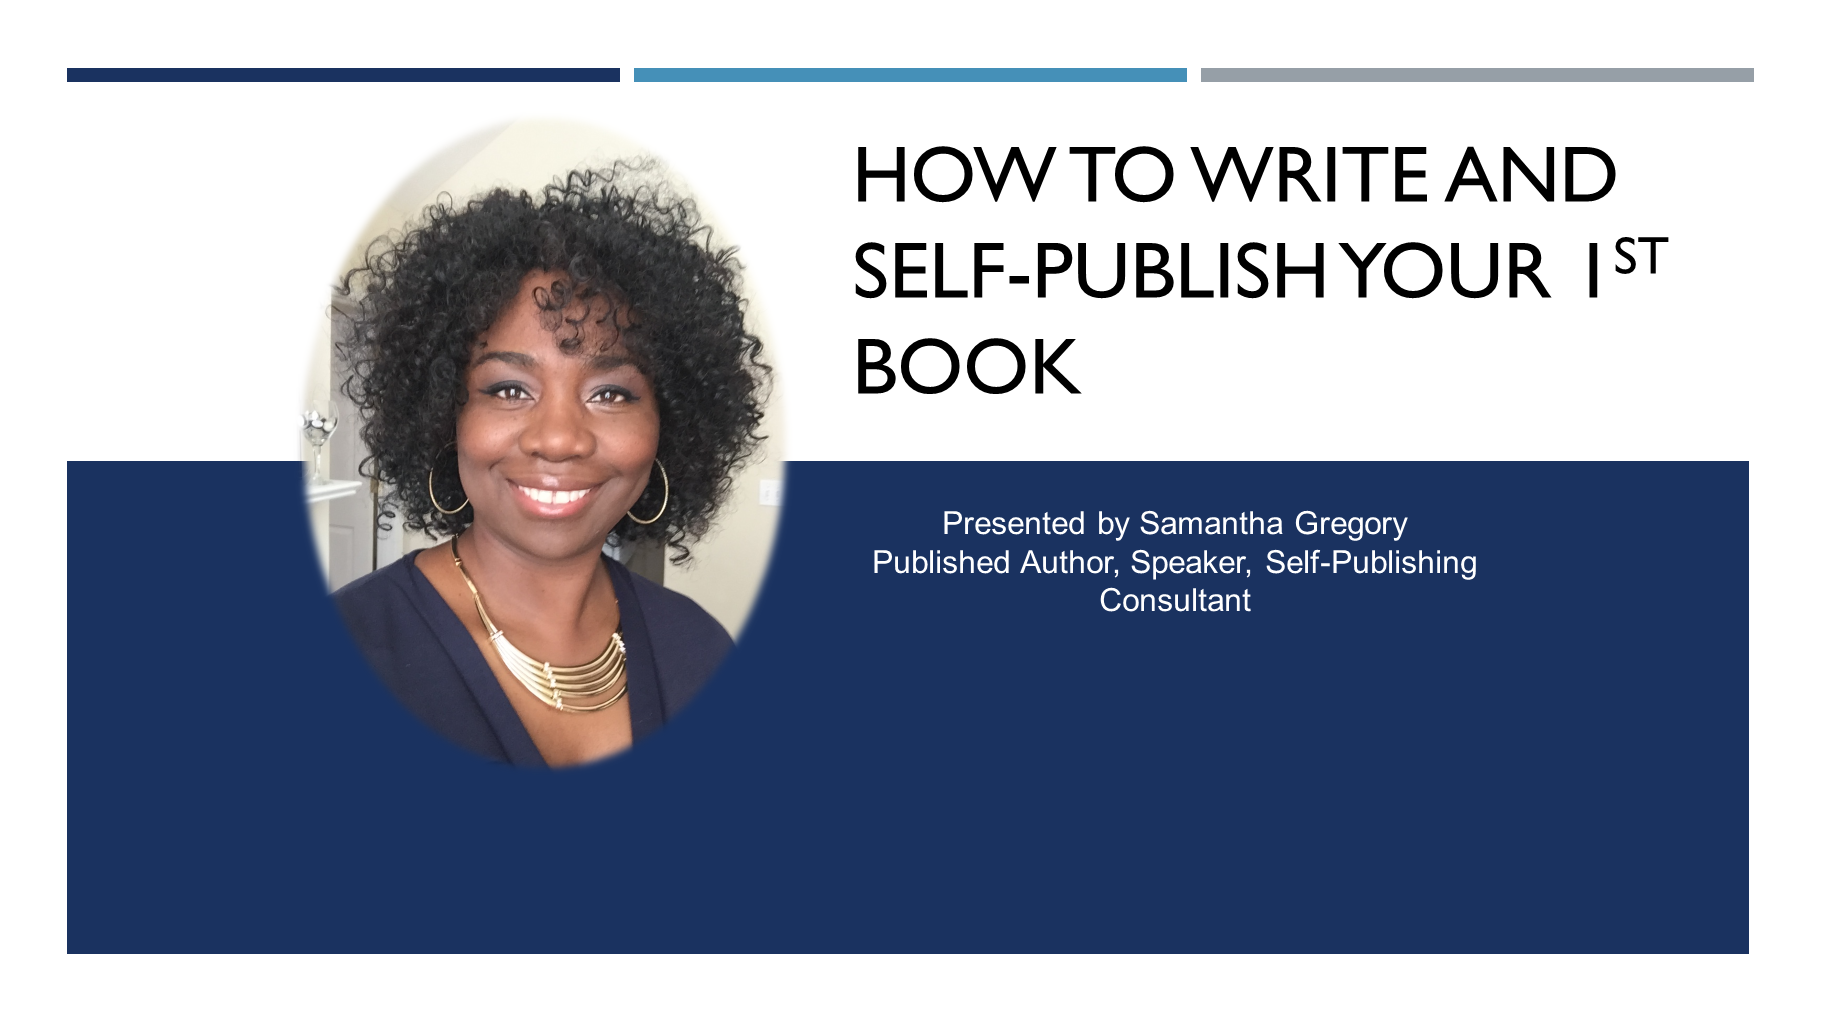 How to Write and Self-Publish Your First Book